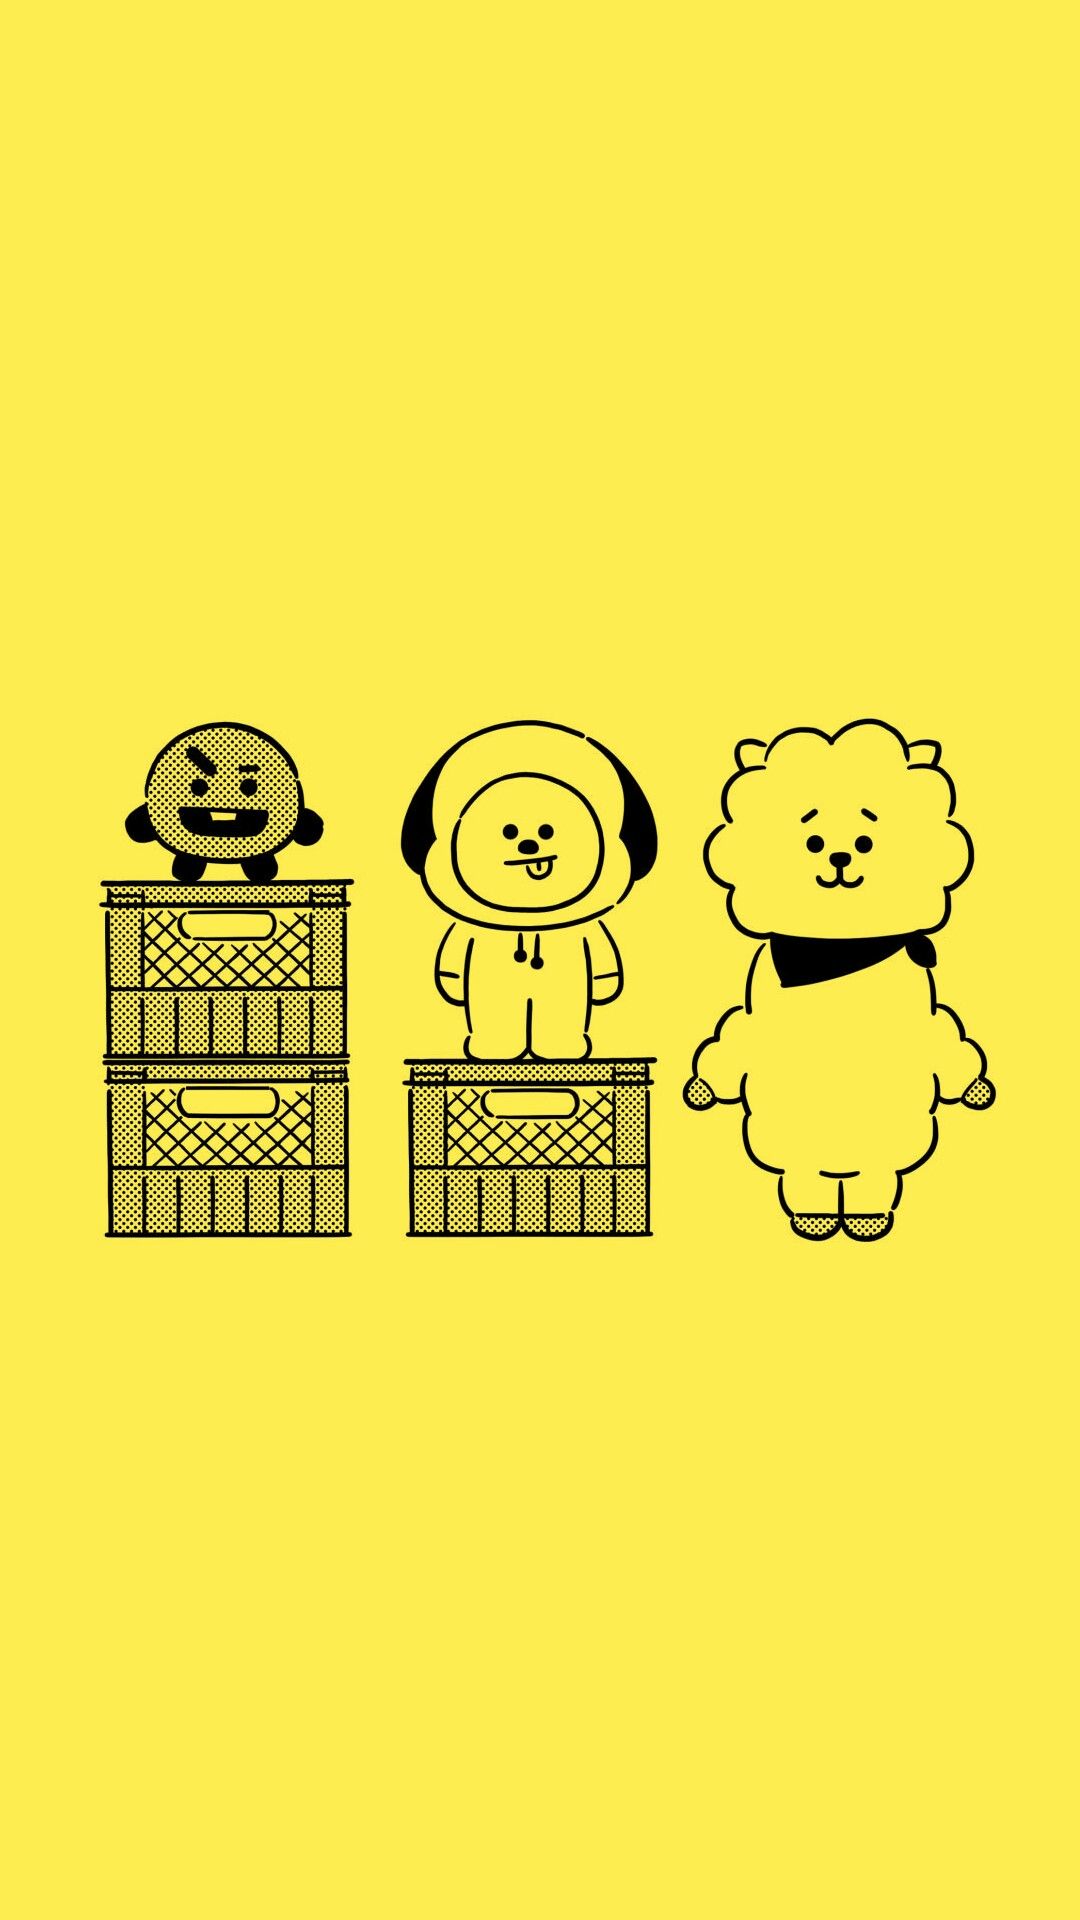 Free Download Bt21 Wallpaper Bt21 Wallpaper Chimmy Tata Cooky Rj Mang 1080x19 For Your Desktop Mobile Tablet Explore 27 Chimmy Wallpapers Chimmy Wallpapers Bt21 Chimmy Wallpapers